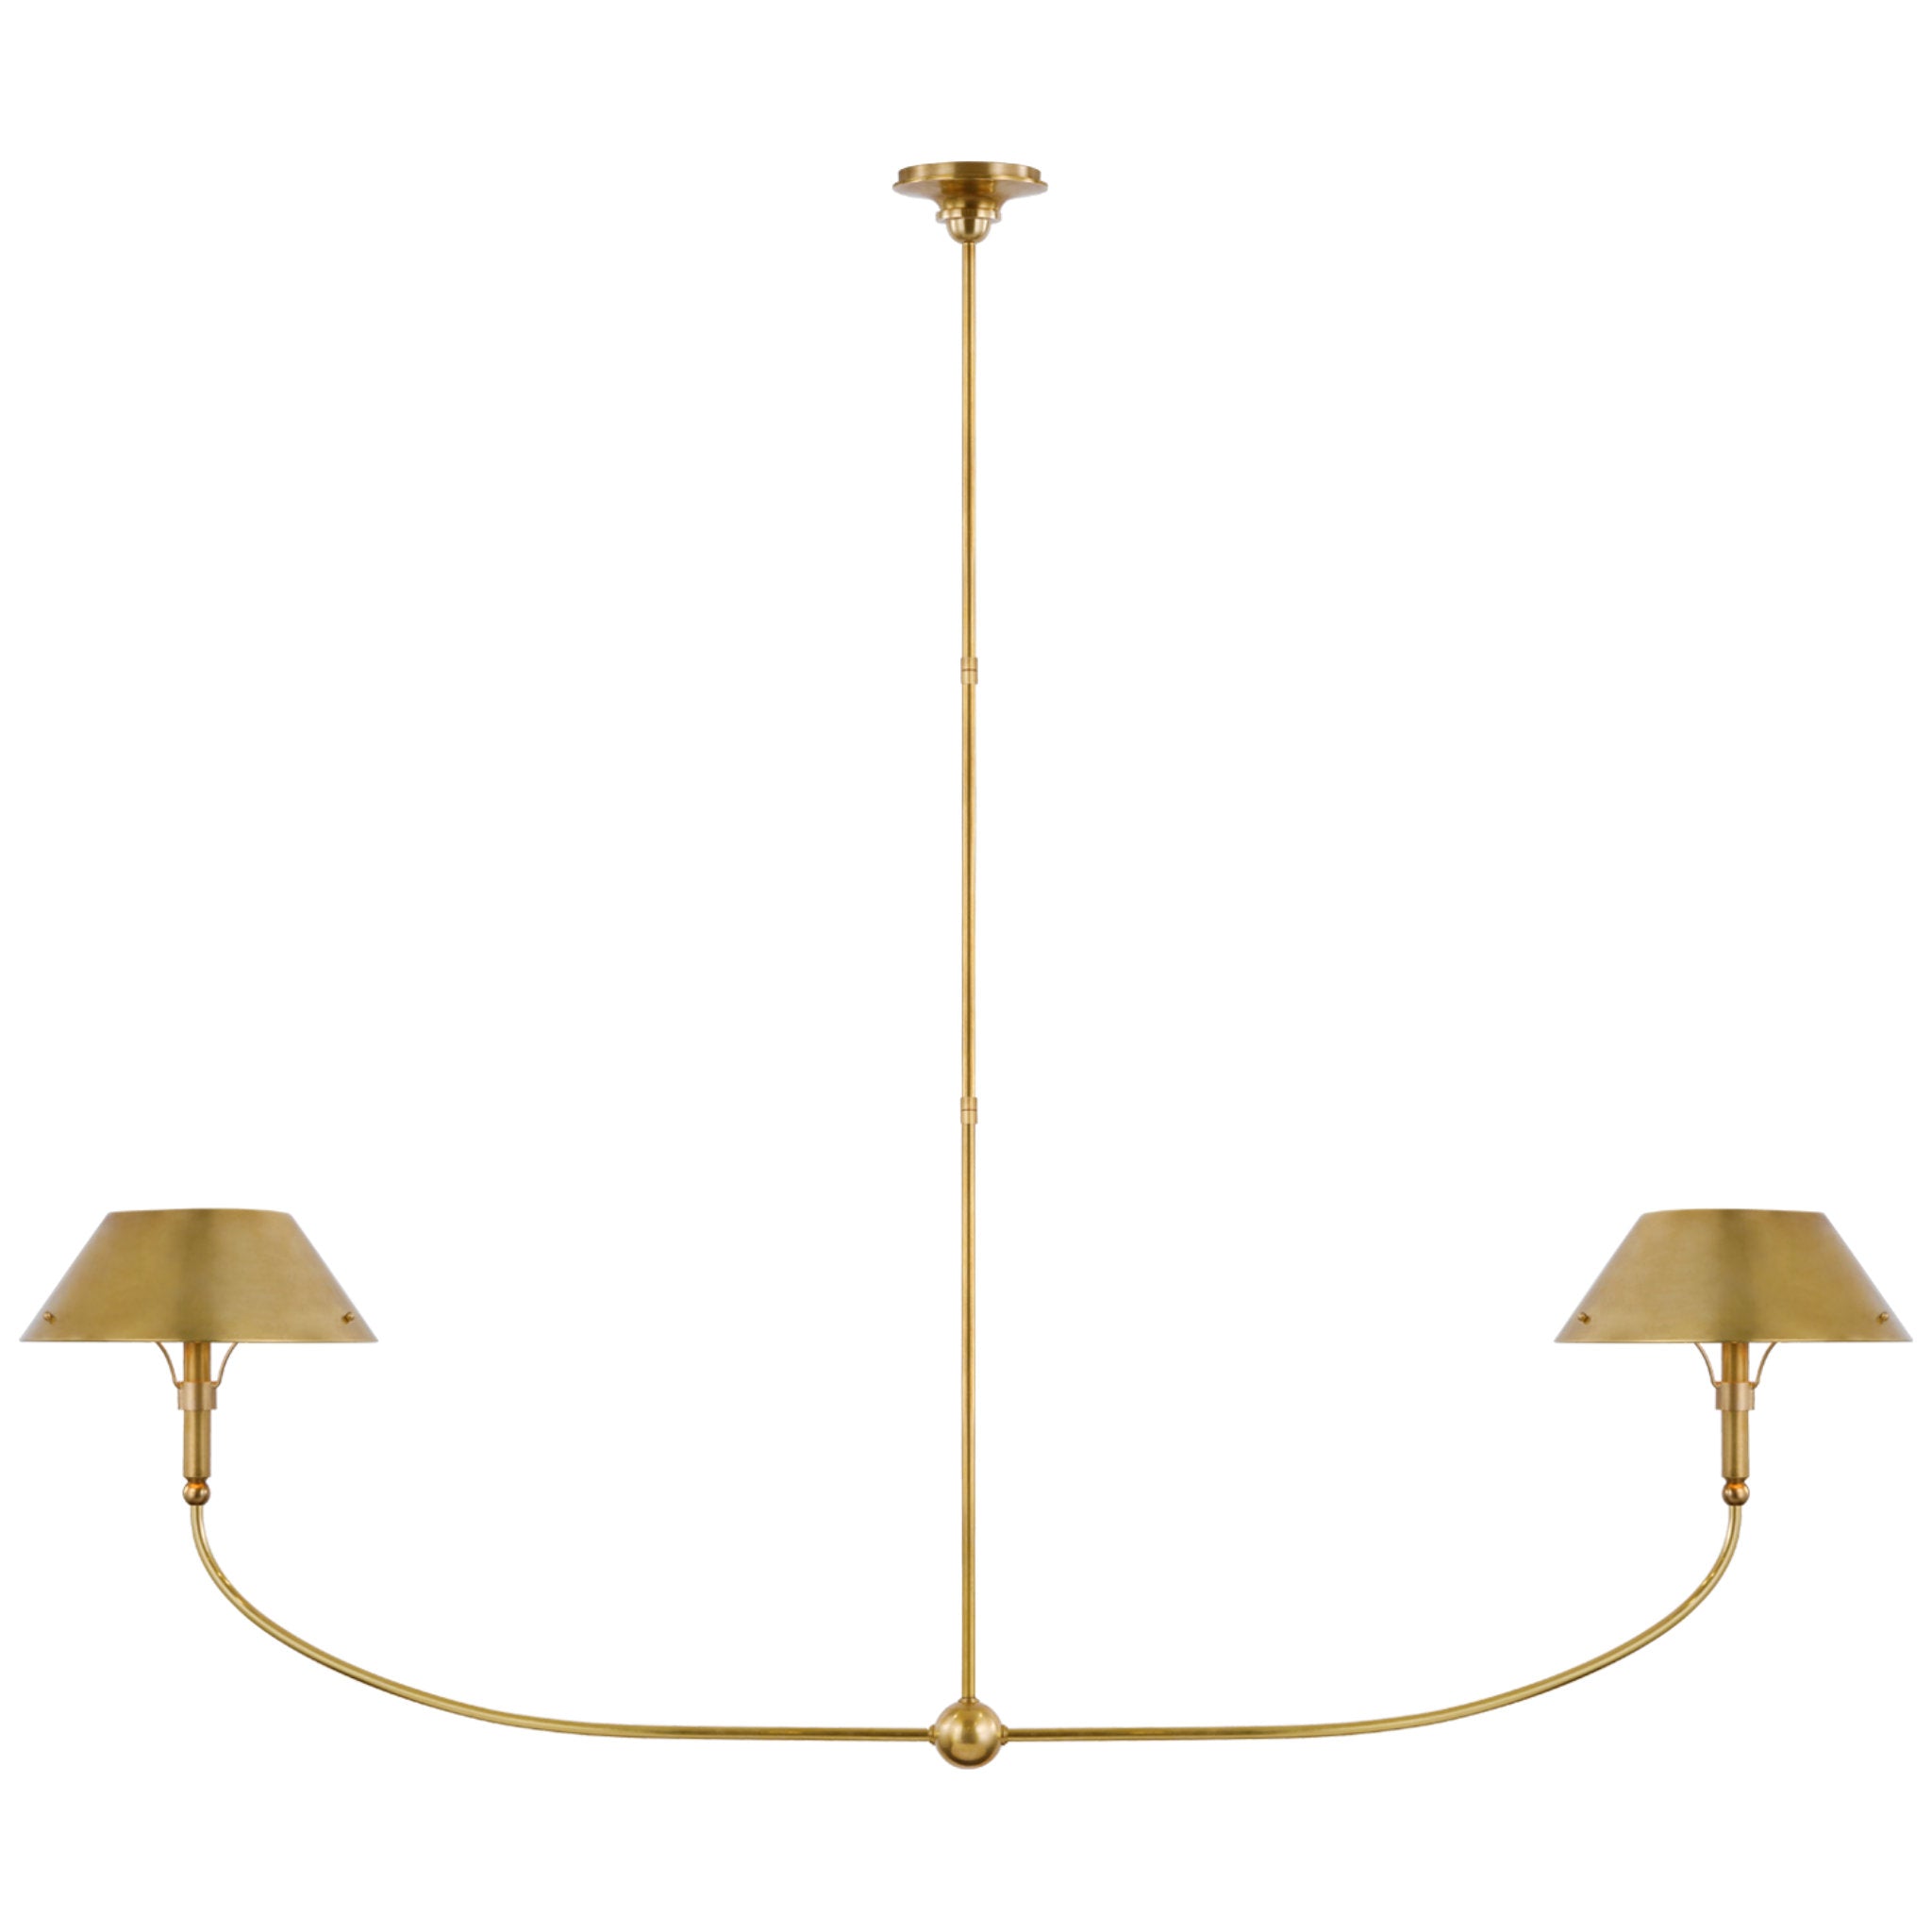 Thomas O'Brien Turlington XL Linear Chandelier in Hand-Rubbed Antique Brass with Hand-Rubbed Antique Brass Shade